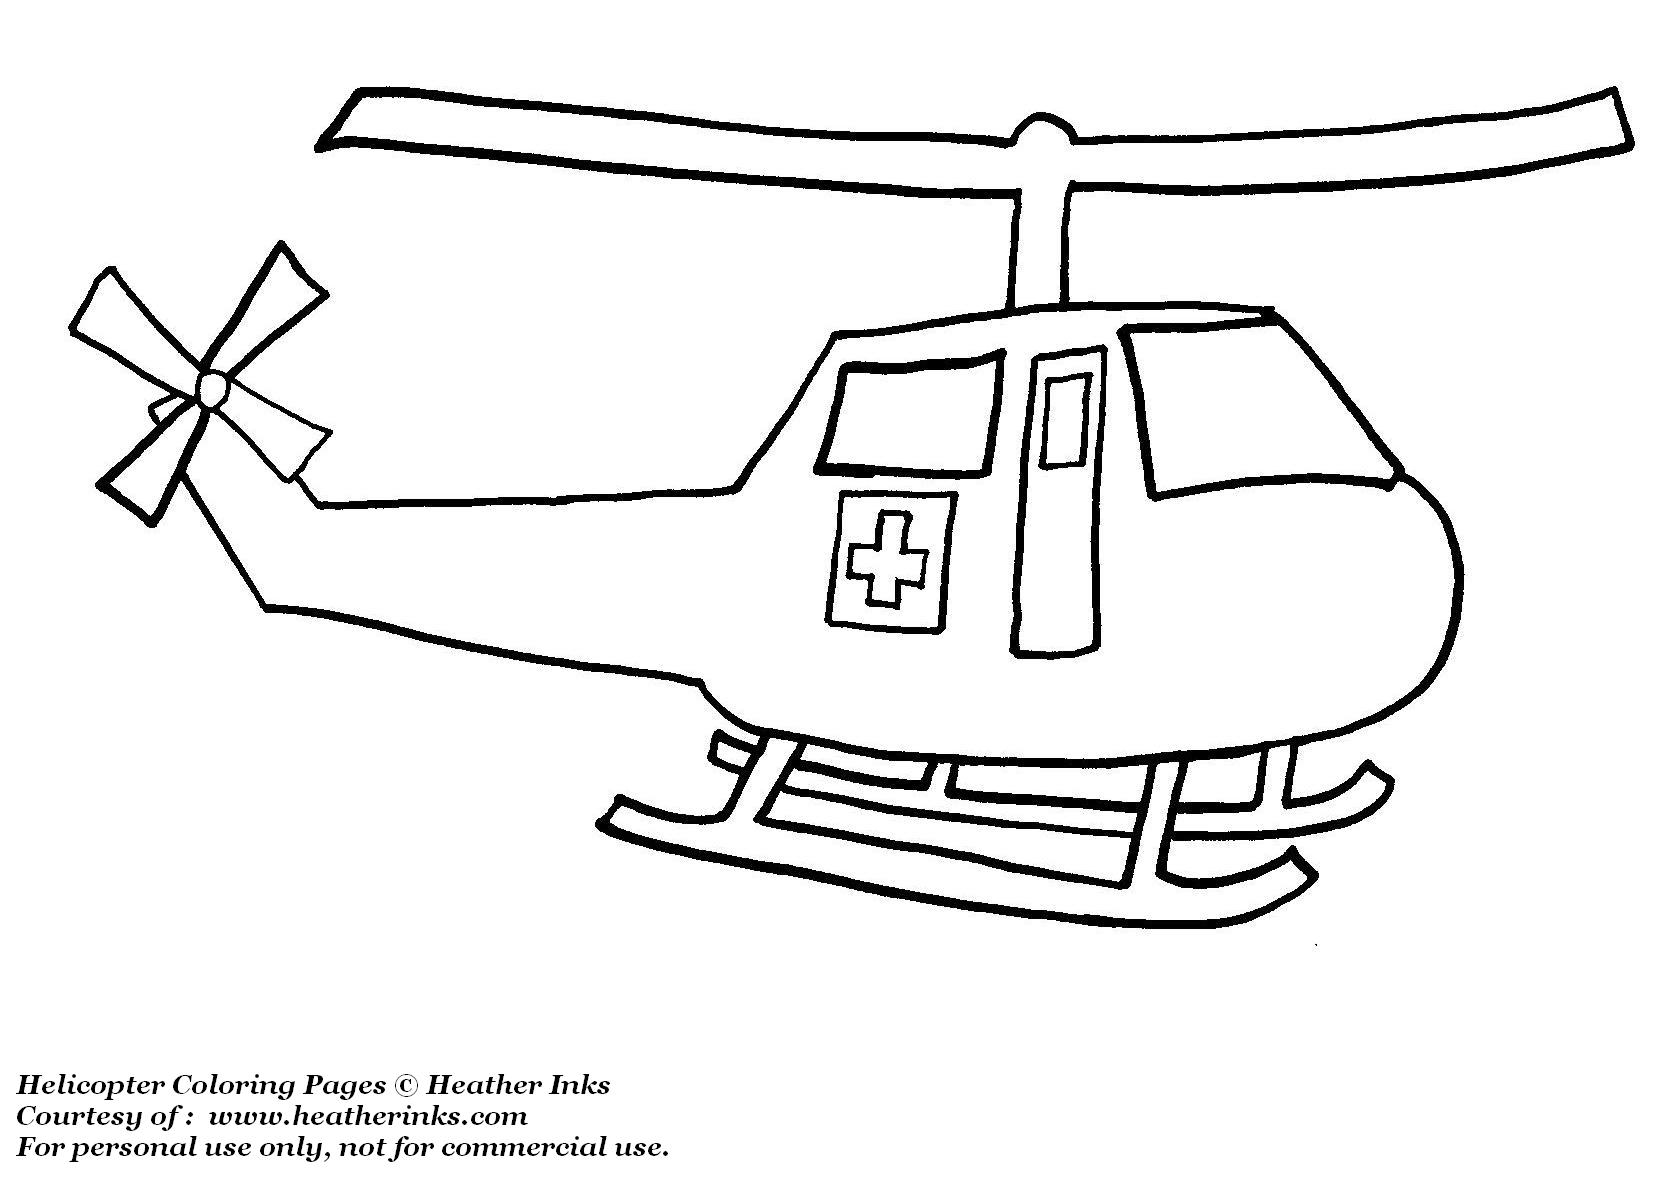 Police Helicopter Coloring Pages   Helicopter Coloring Pages ...